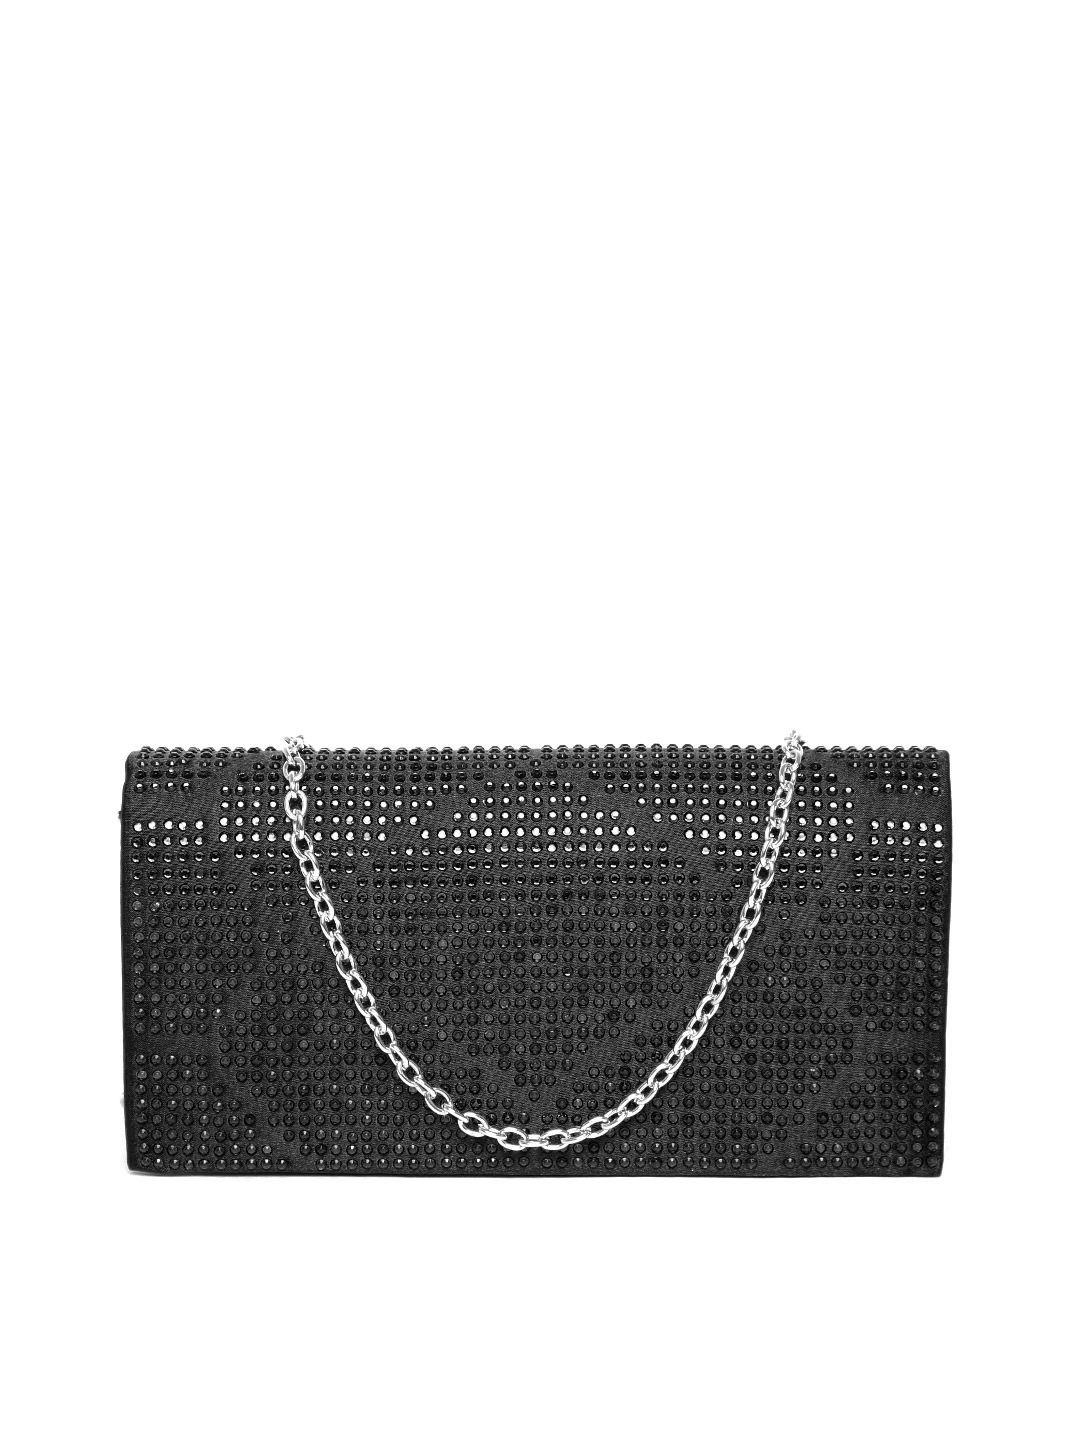 giordano black embellished clutch with chain strap